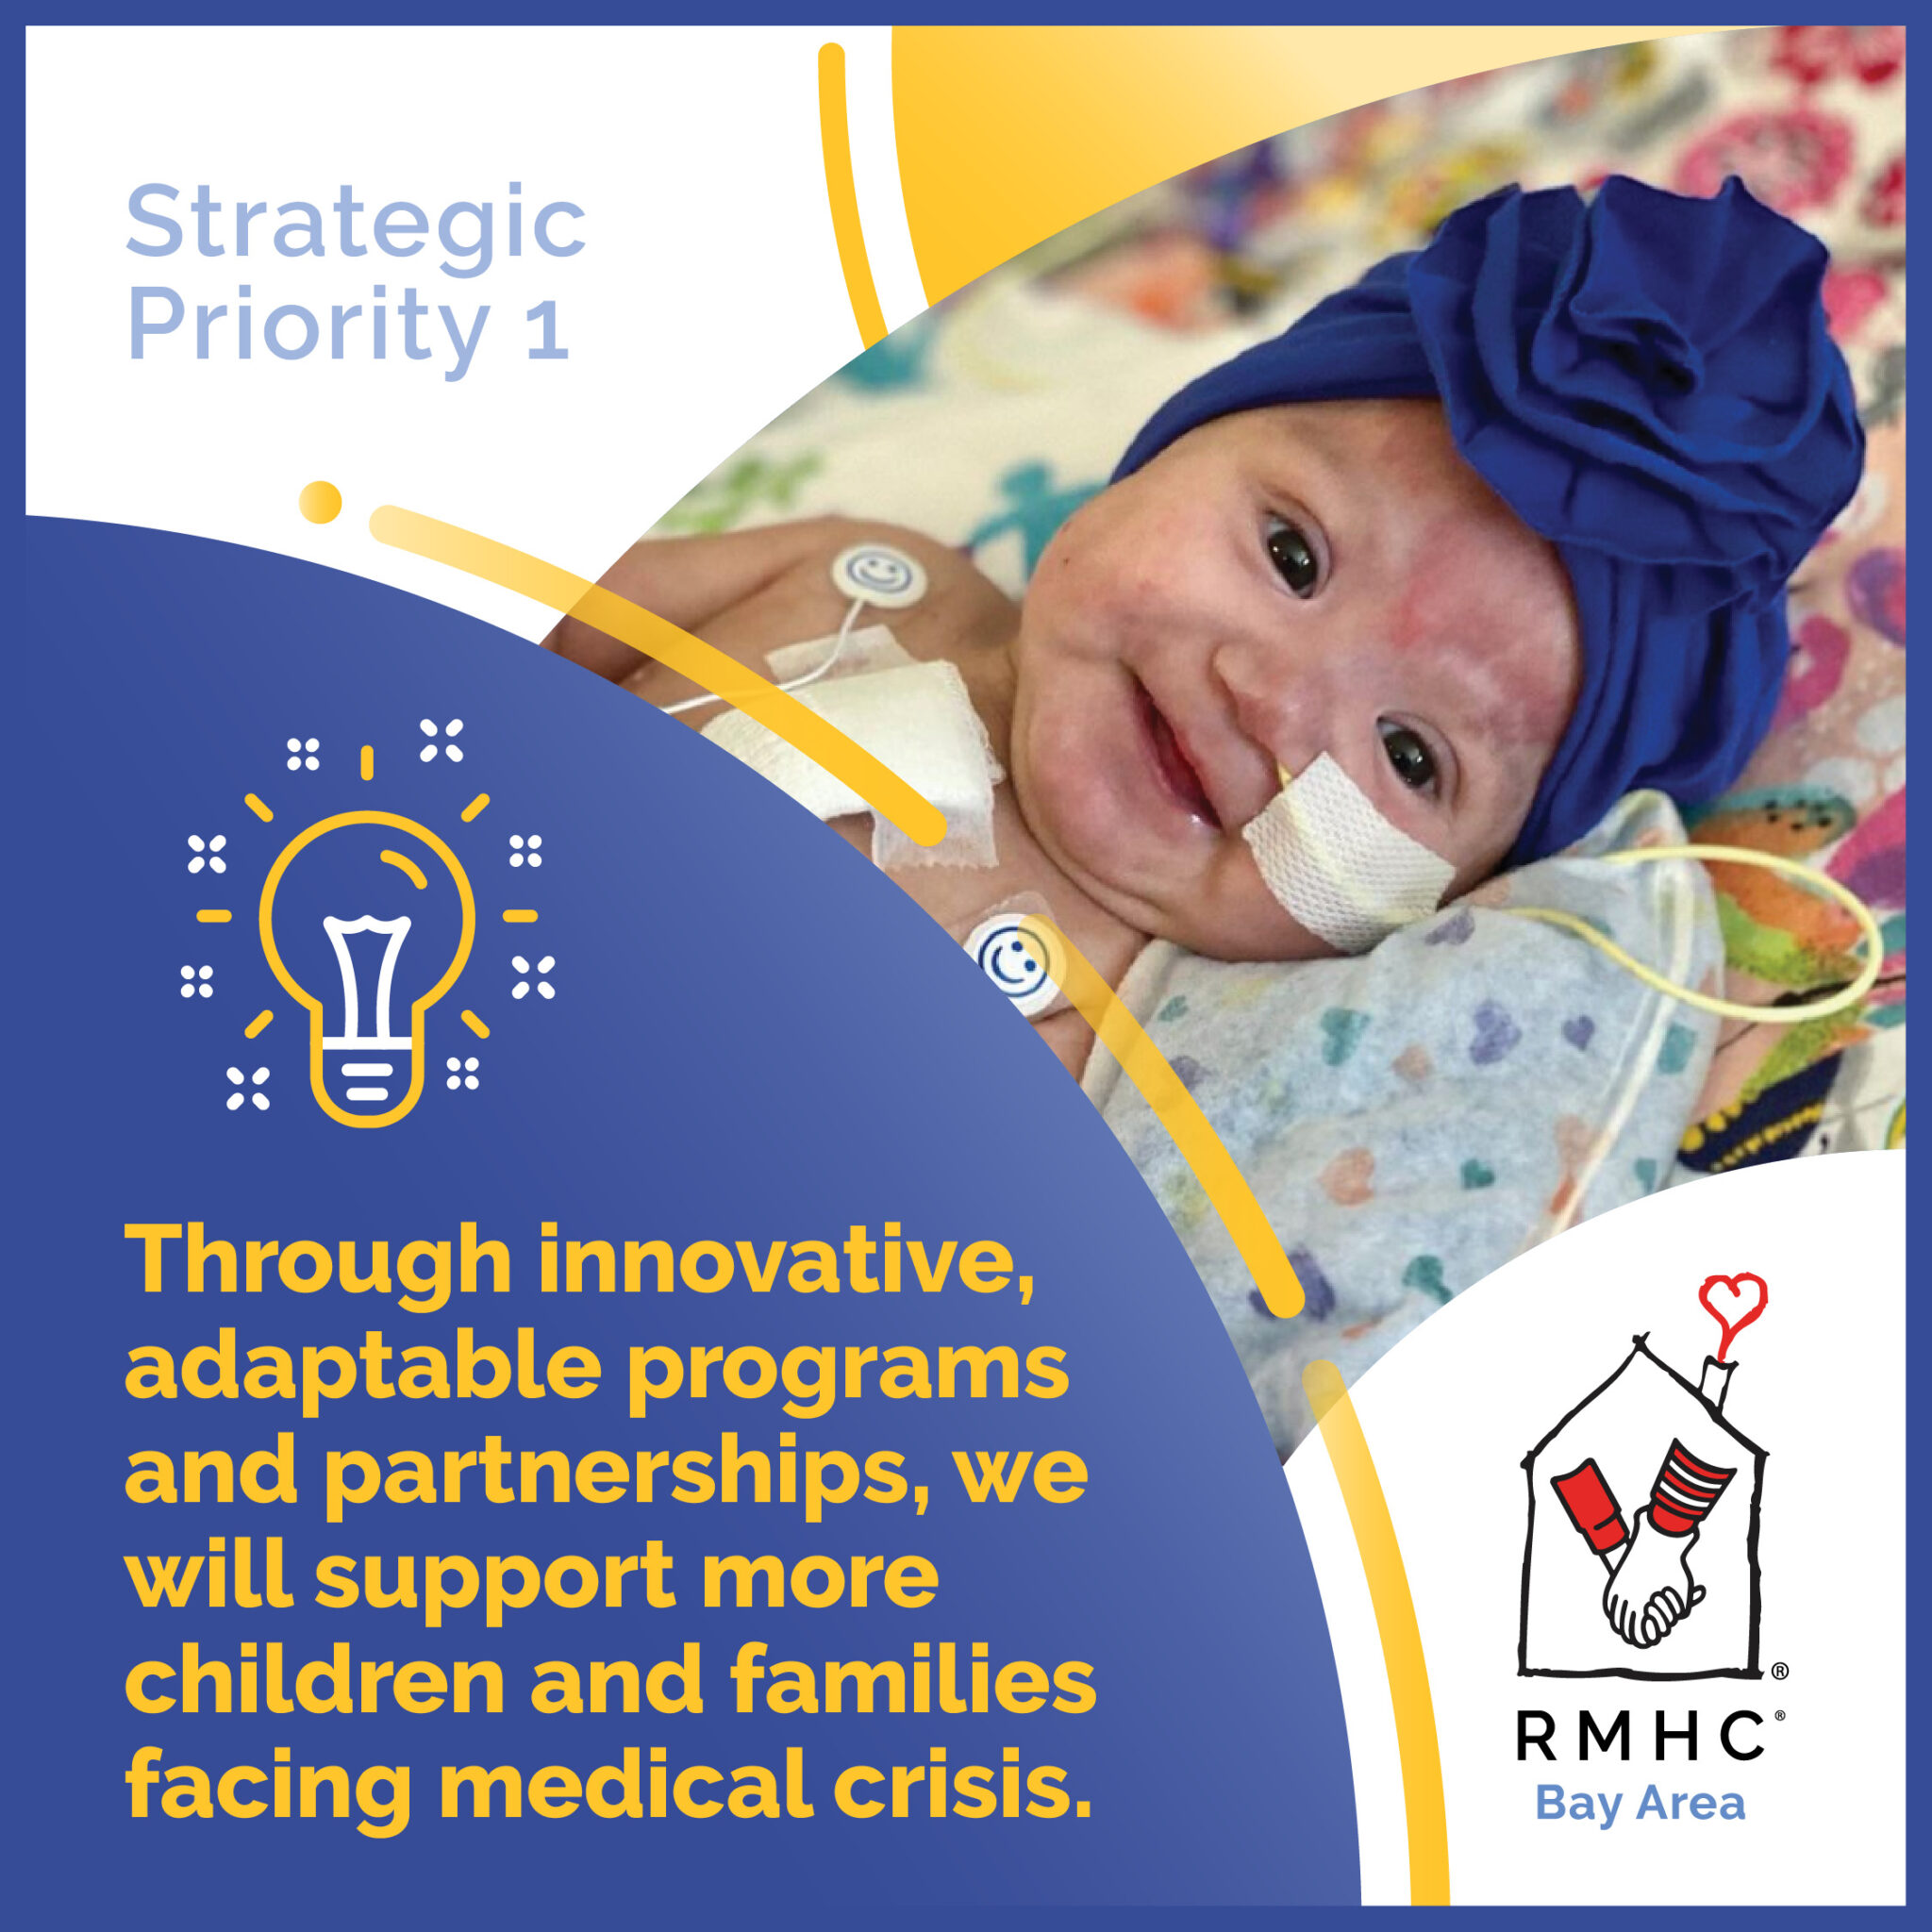 Strategic Priority 1 - Though innovative adaptable programs and partnerships, we will support more children and families facing medical crisis.